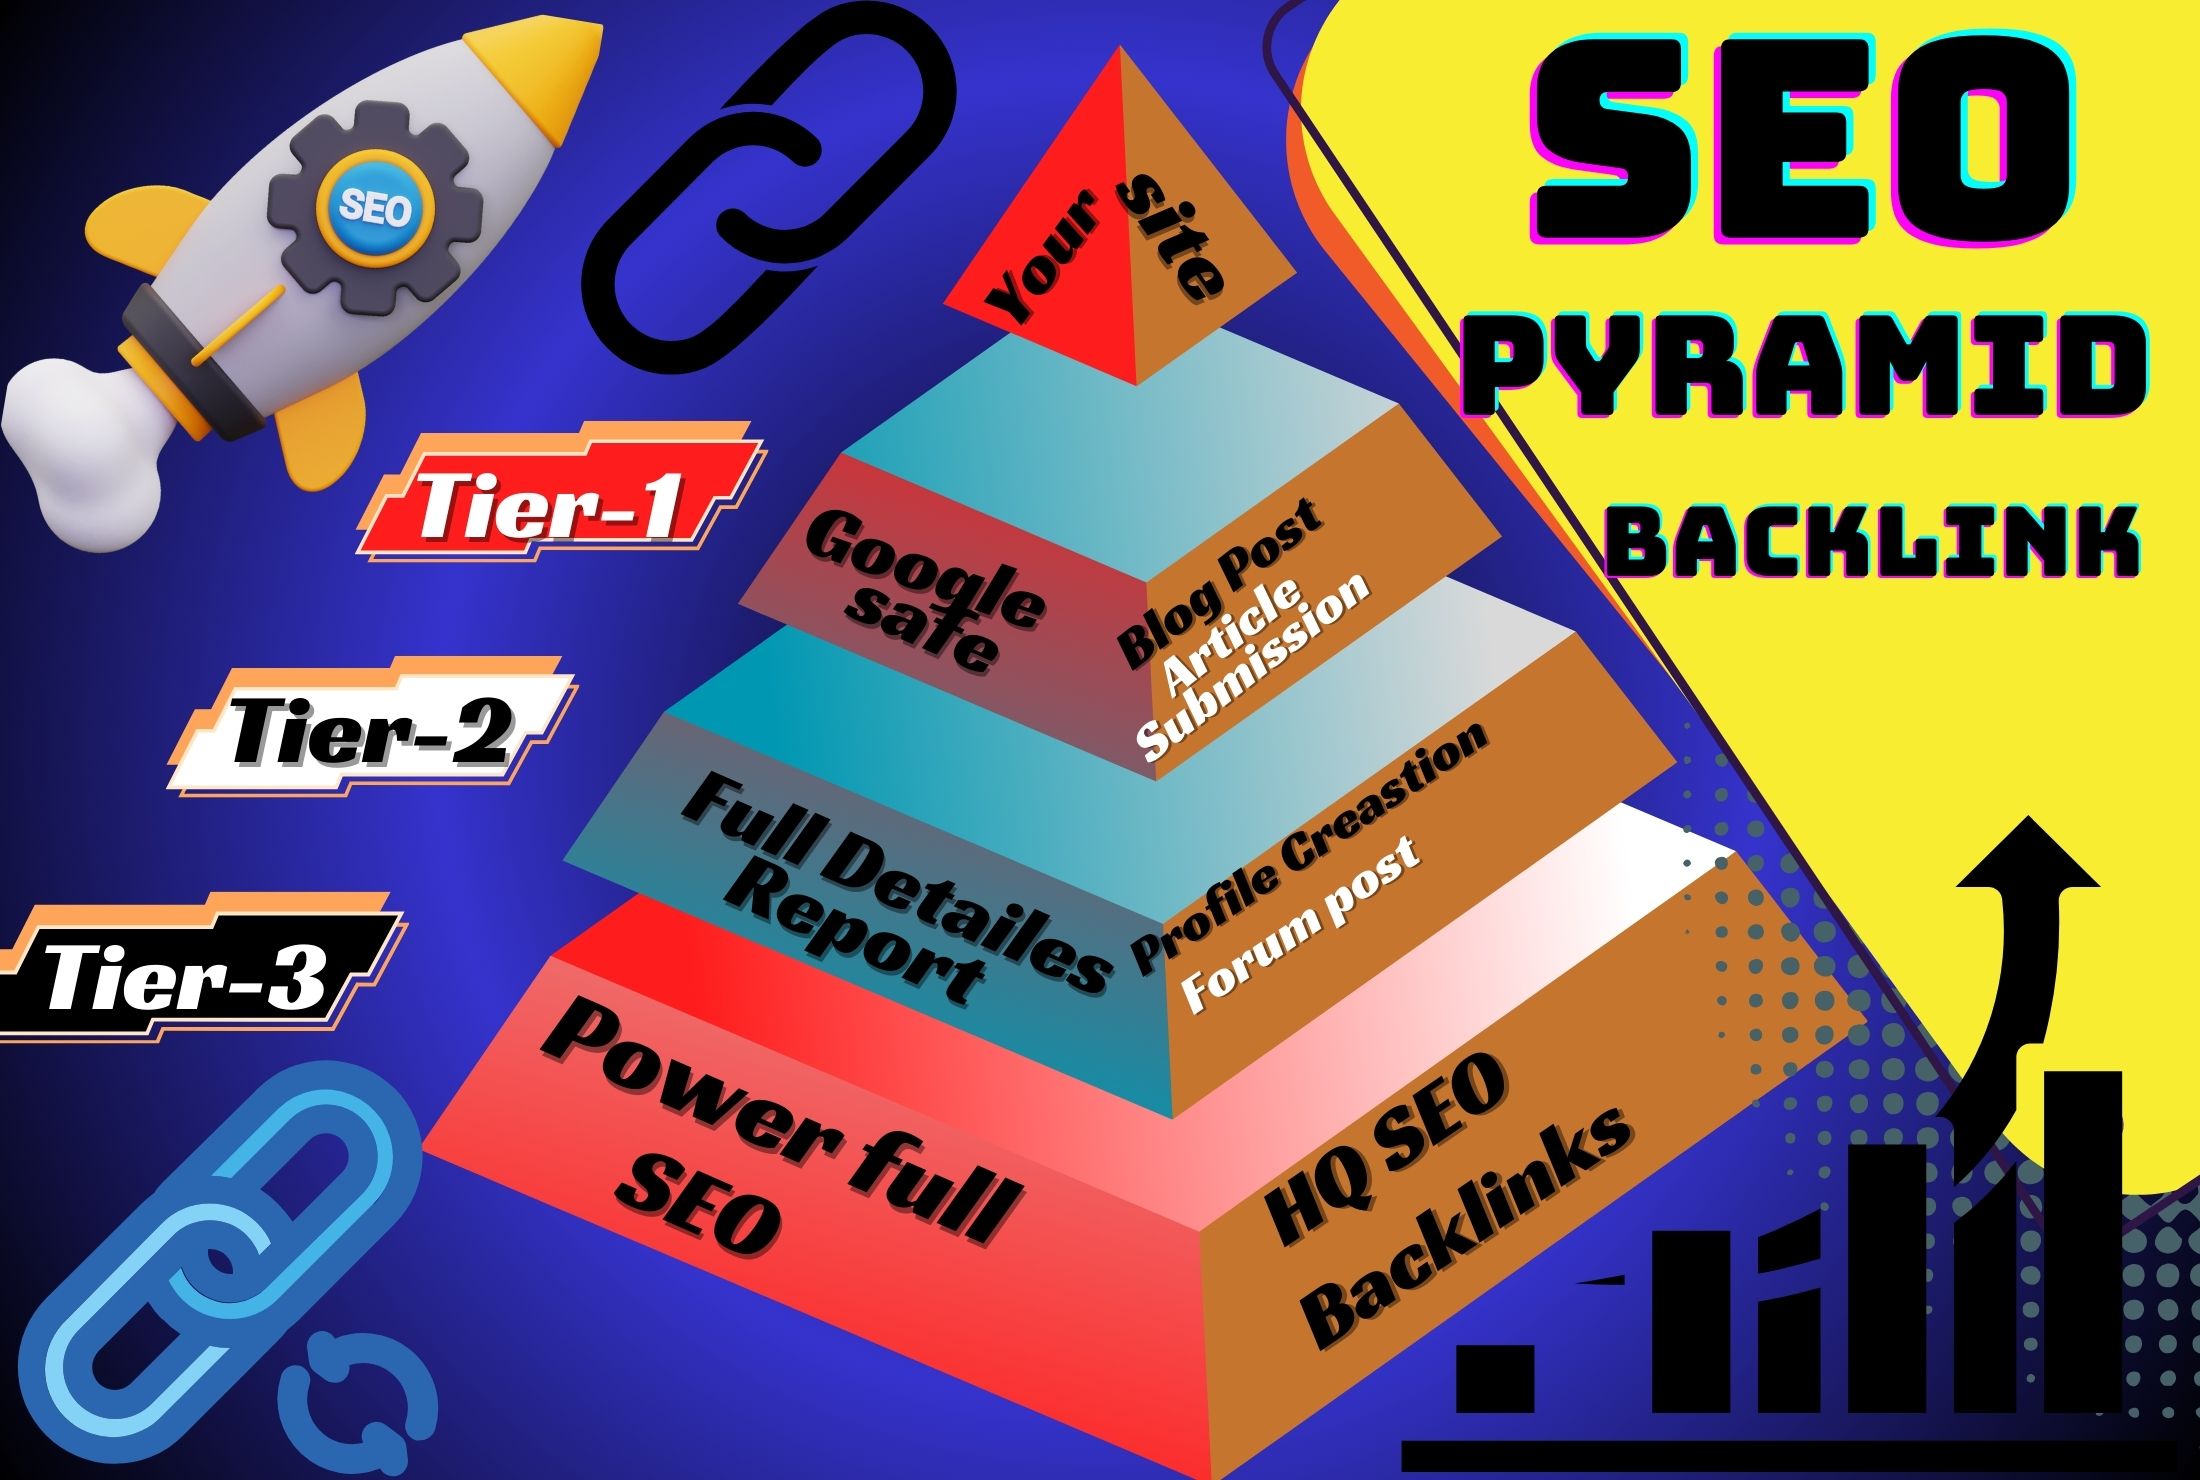 150+ power full SEO Pyramid - Improve your rankings while building